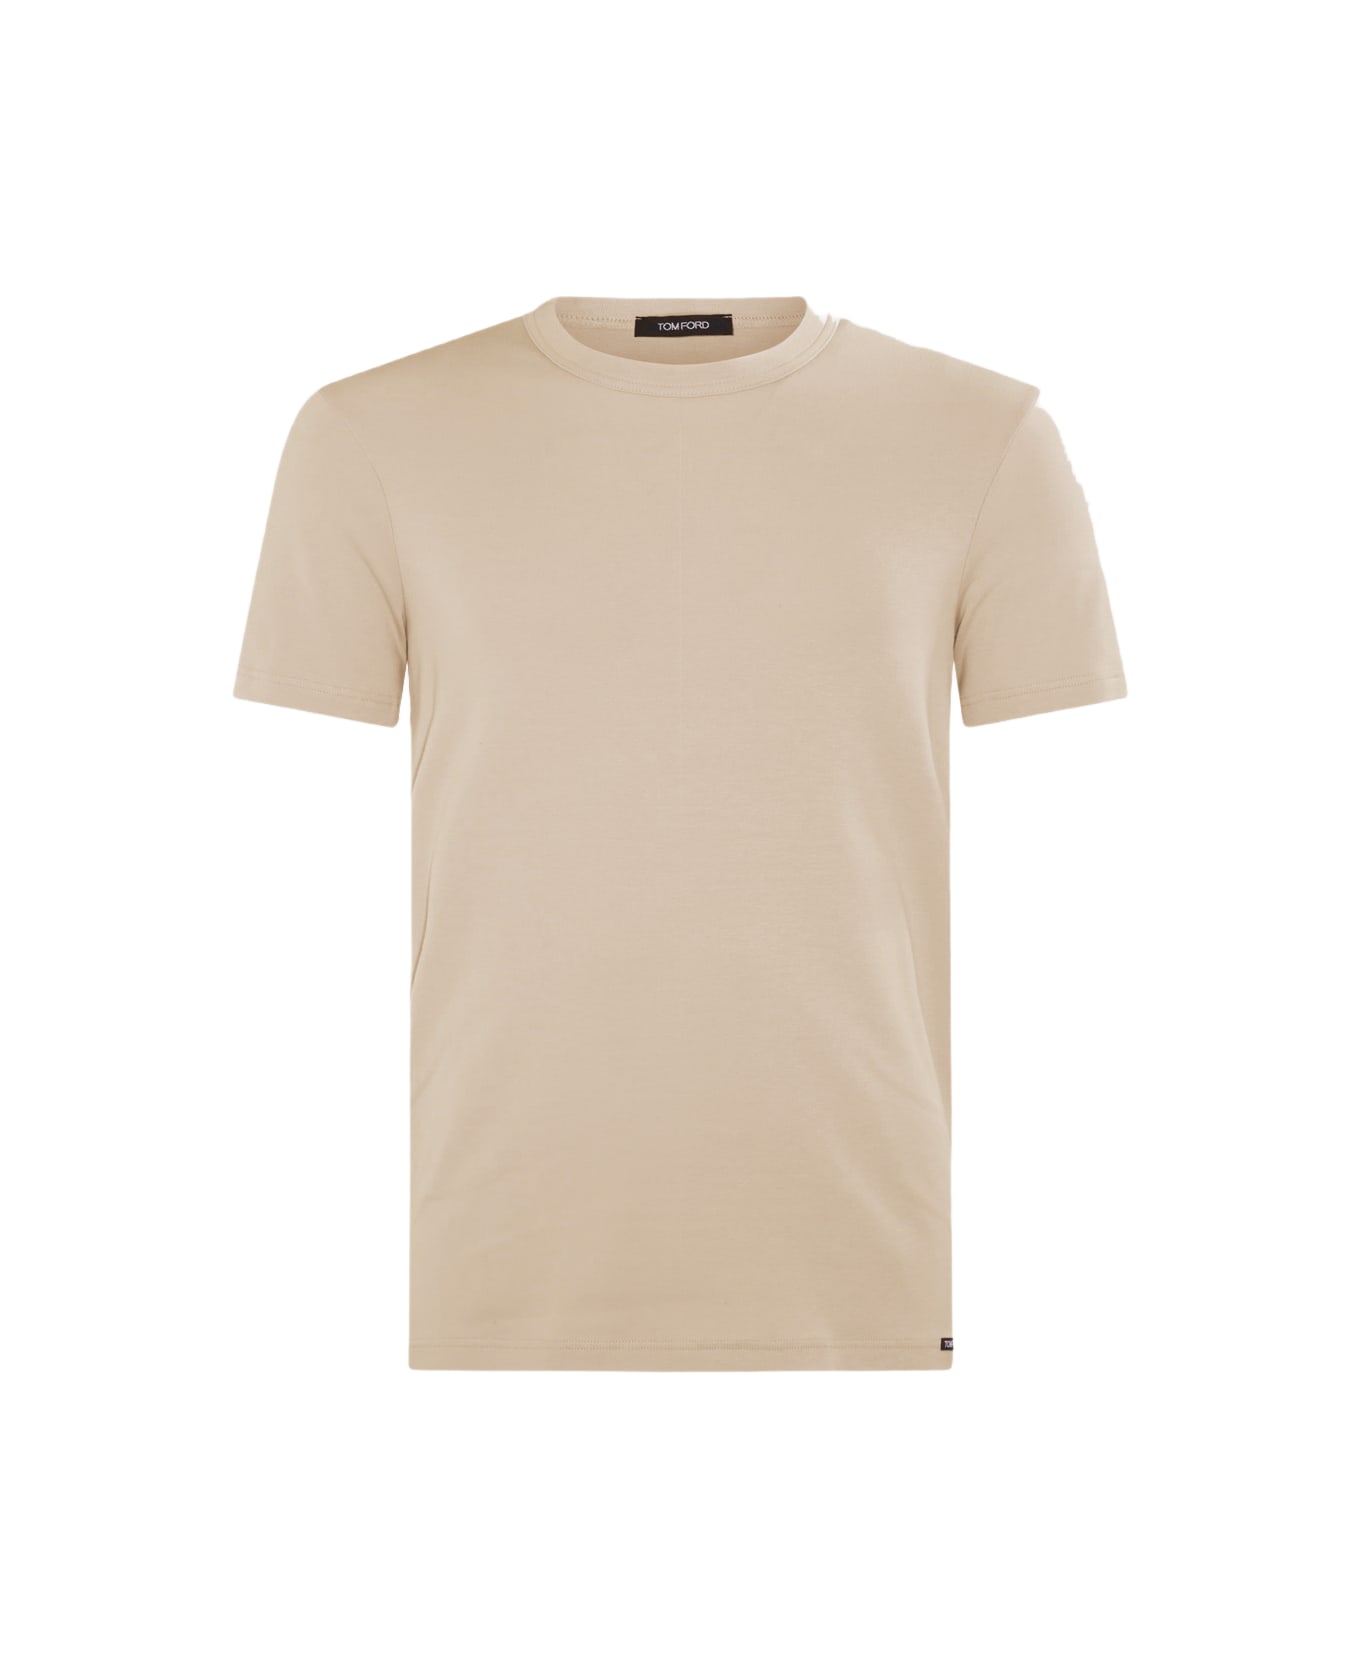 Tom Ford Beige Cotton Blend T-shirt - NUDE 1